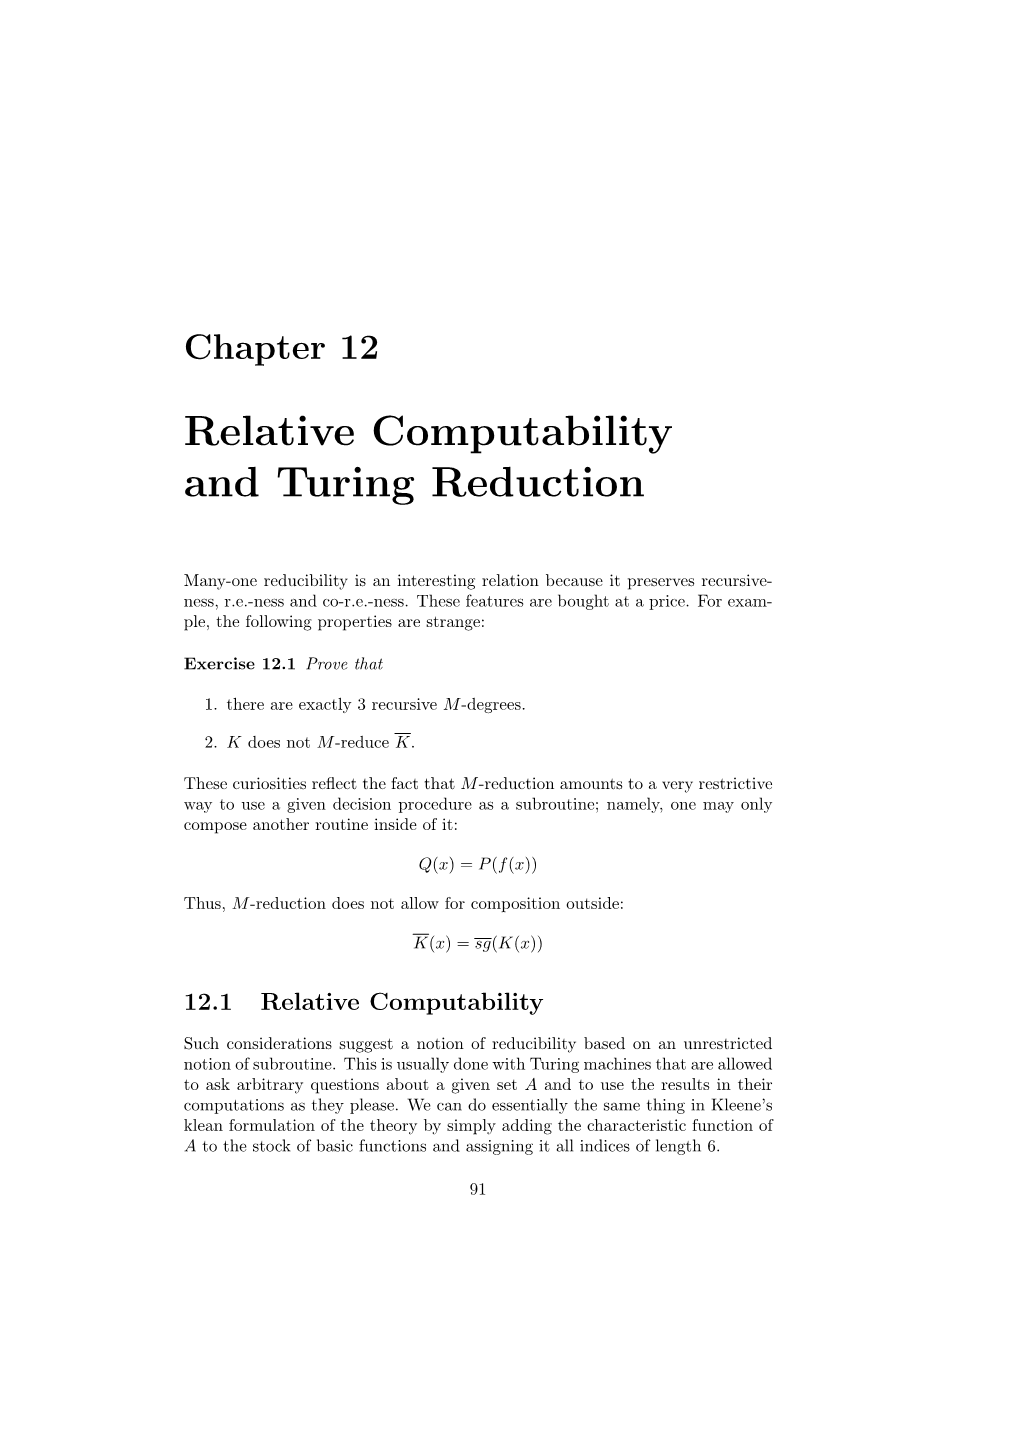 Relative Computability and Turing Reduction